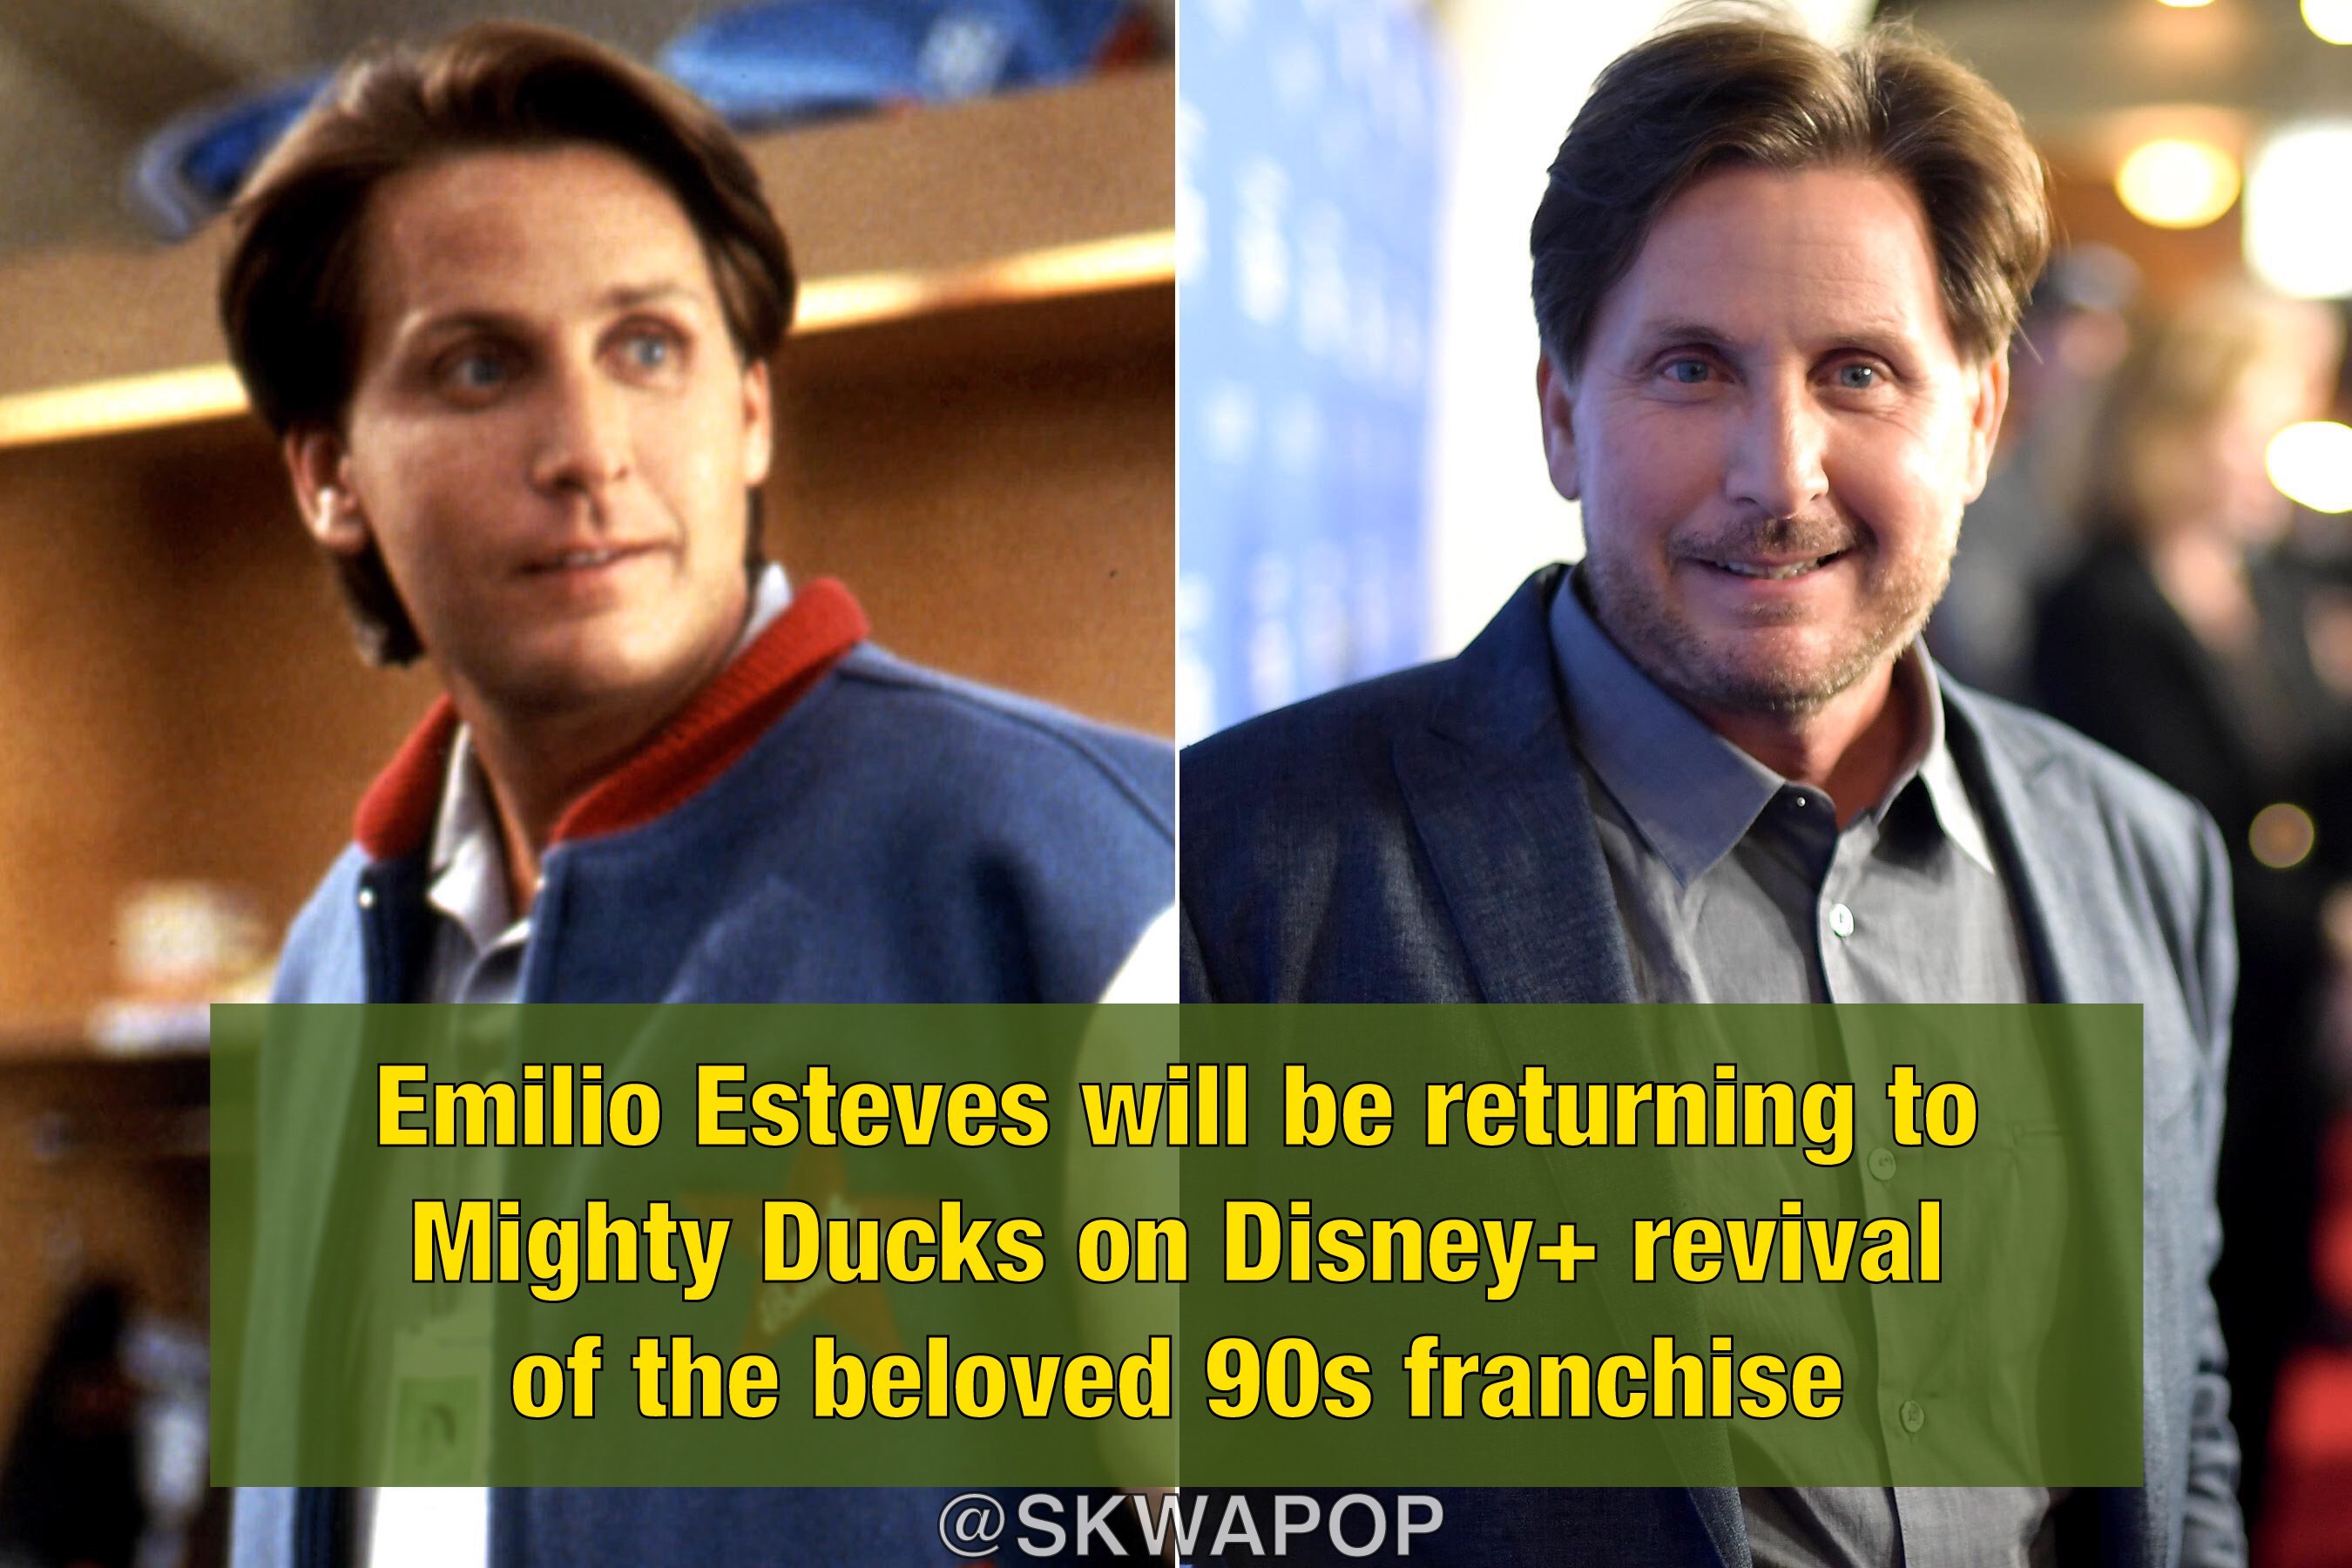 photo caption - Emilio Esteves will be returning to Mighty Ducks on Disney revival of the beloved 90s franchise